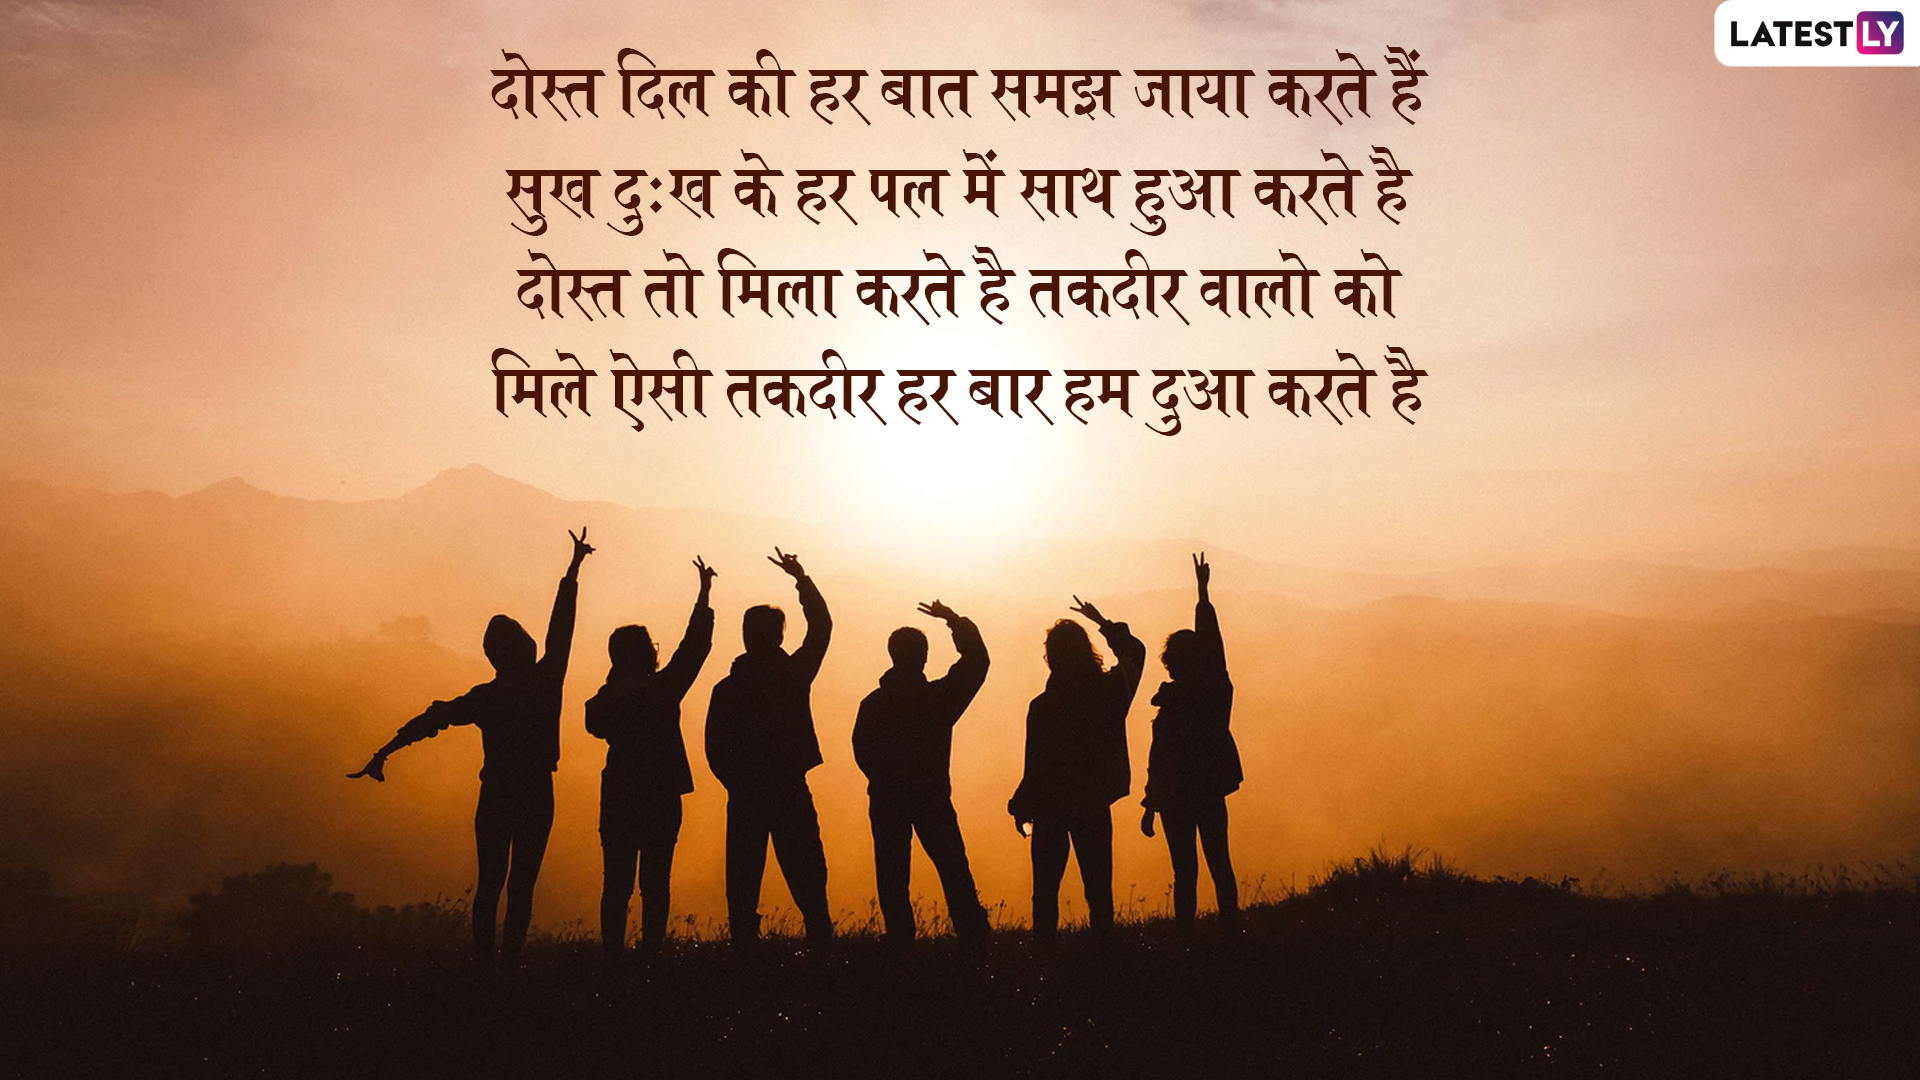 hindi quotes for friendship forever